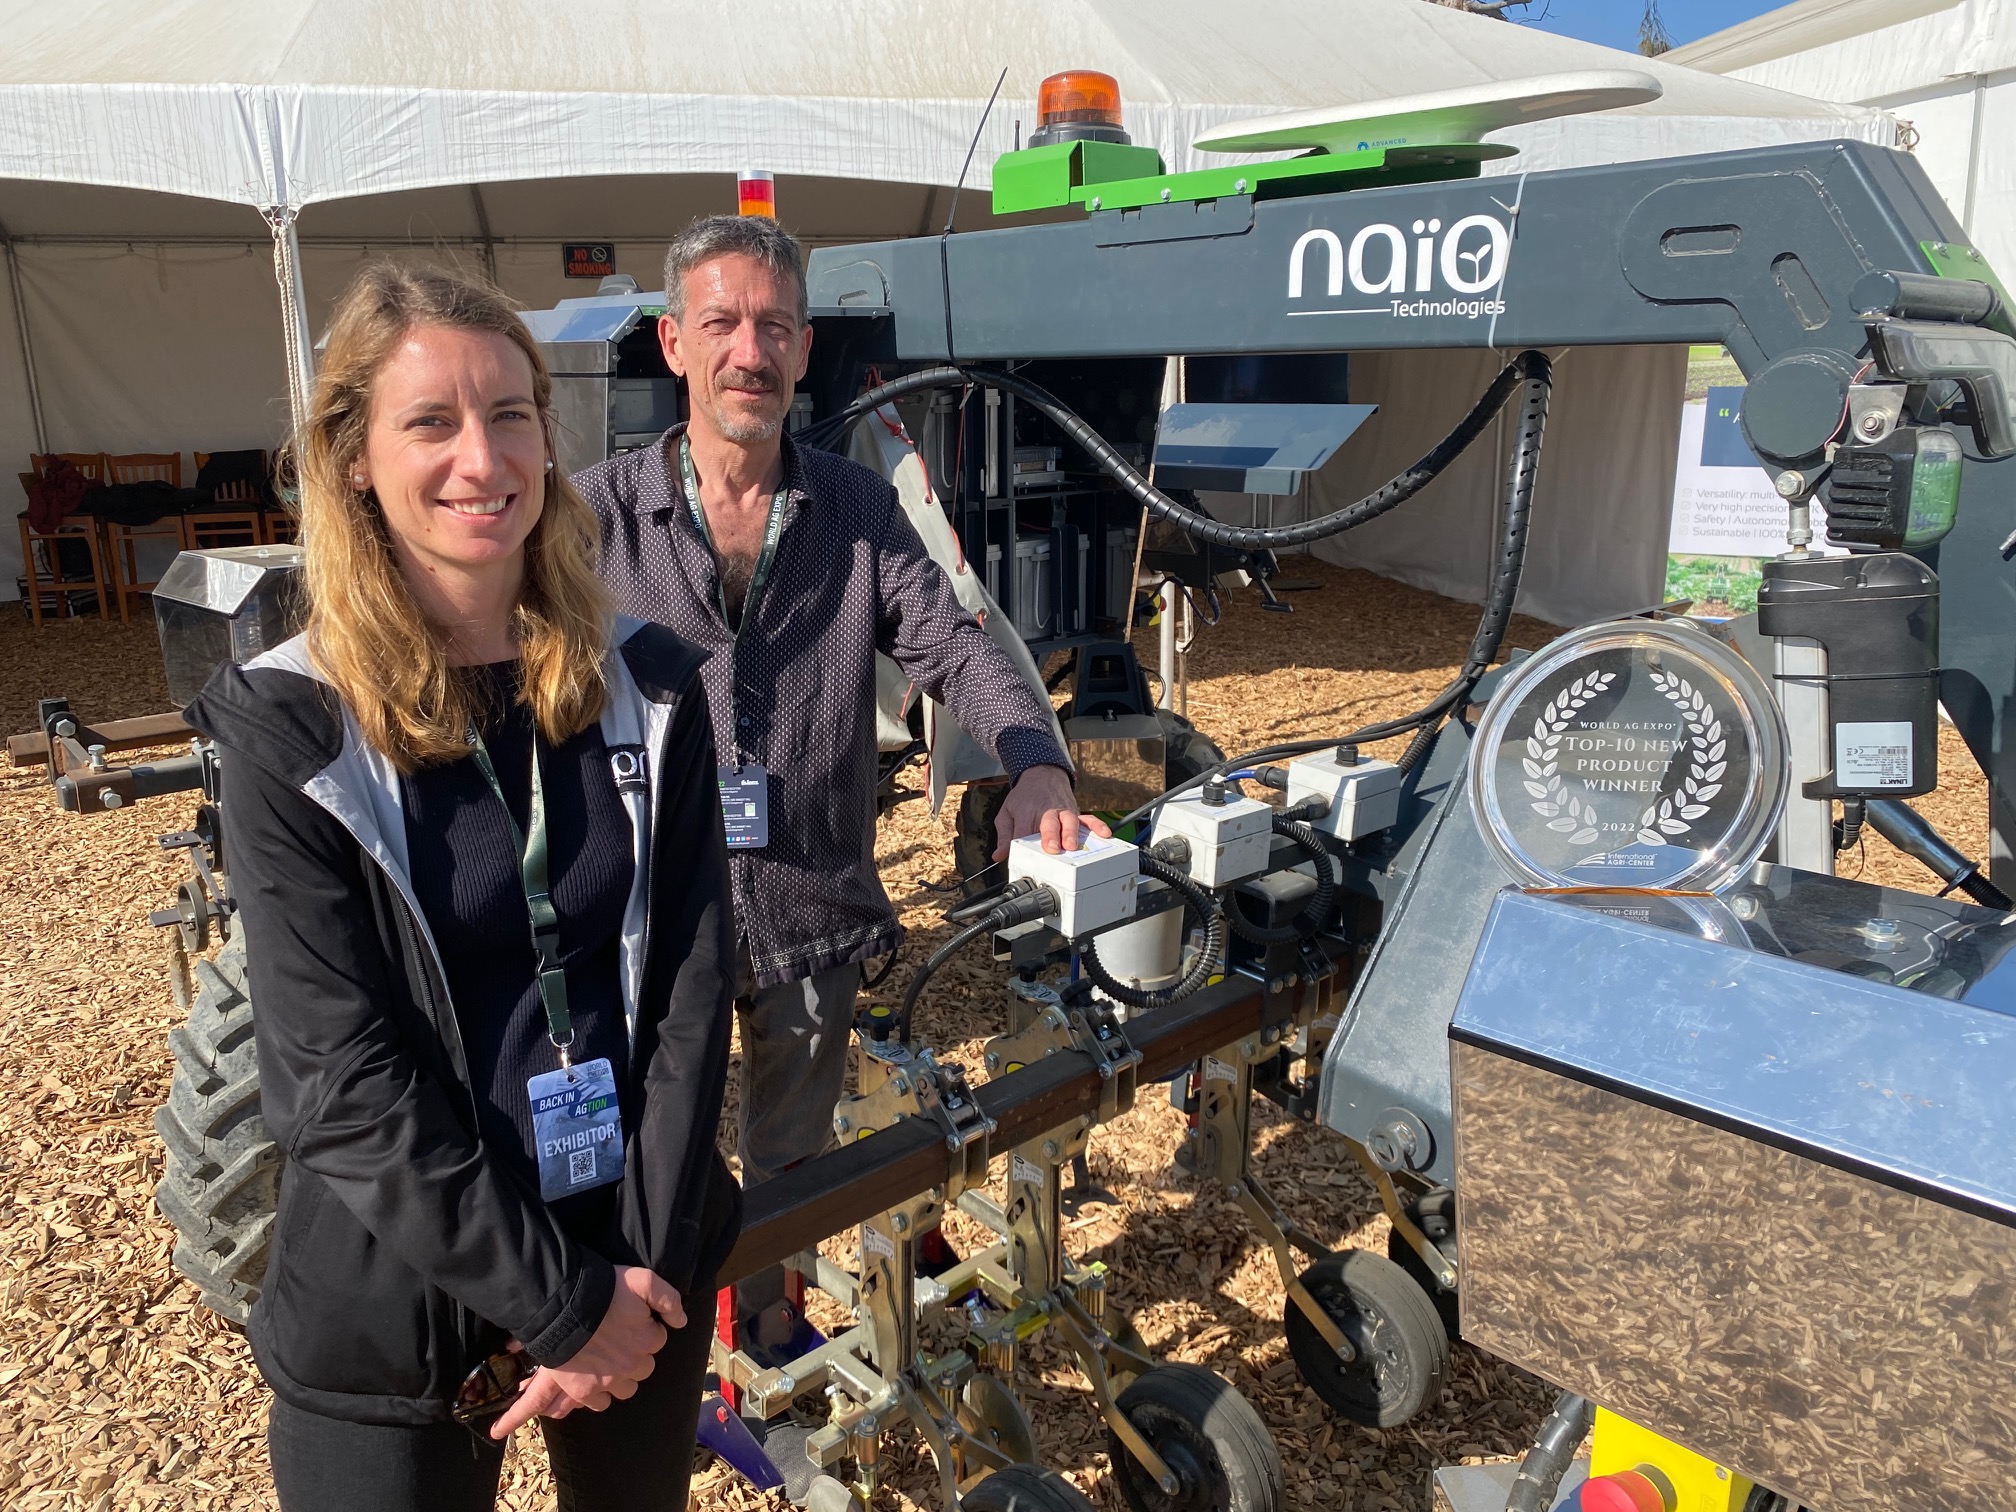  Ingrid Sarlandi and another member of Naio Technologies stand next to Orio, a top-10 product winner at the World Ag Expo this year. Orio is a straddle robot designed for row crops and beds of vegetables. 